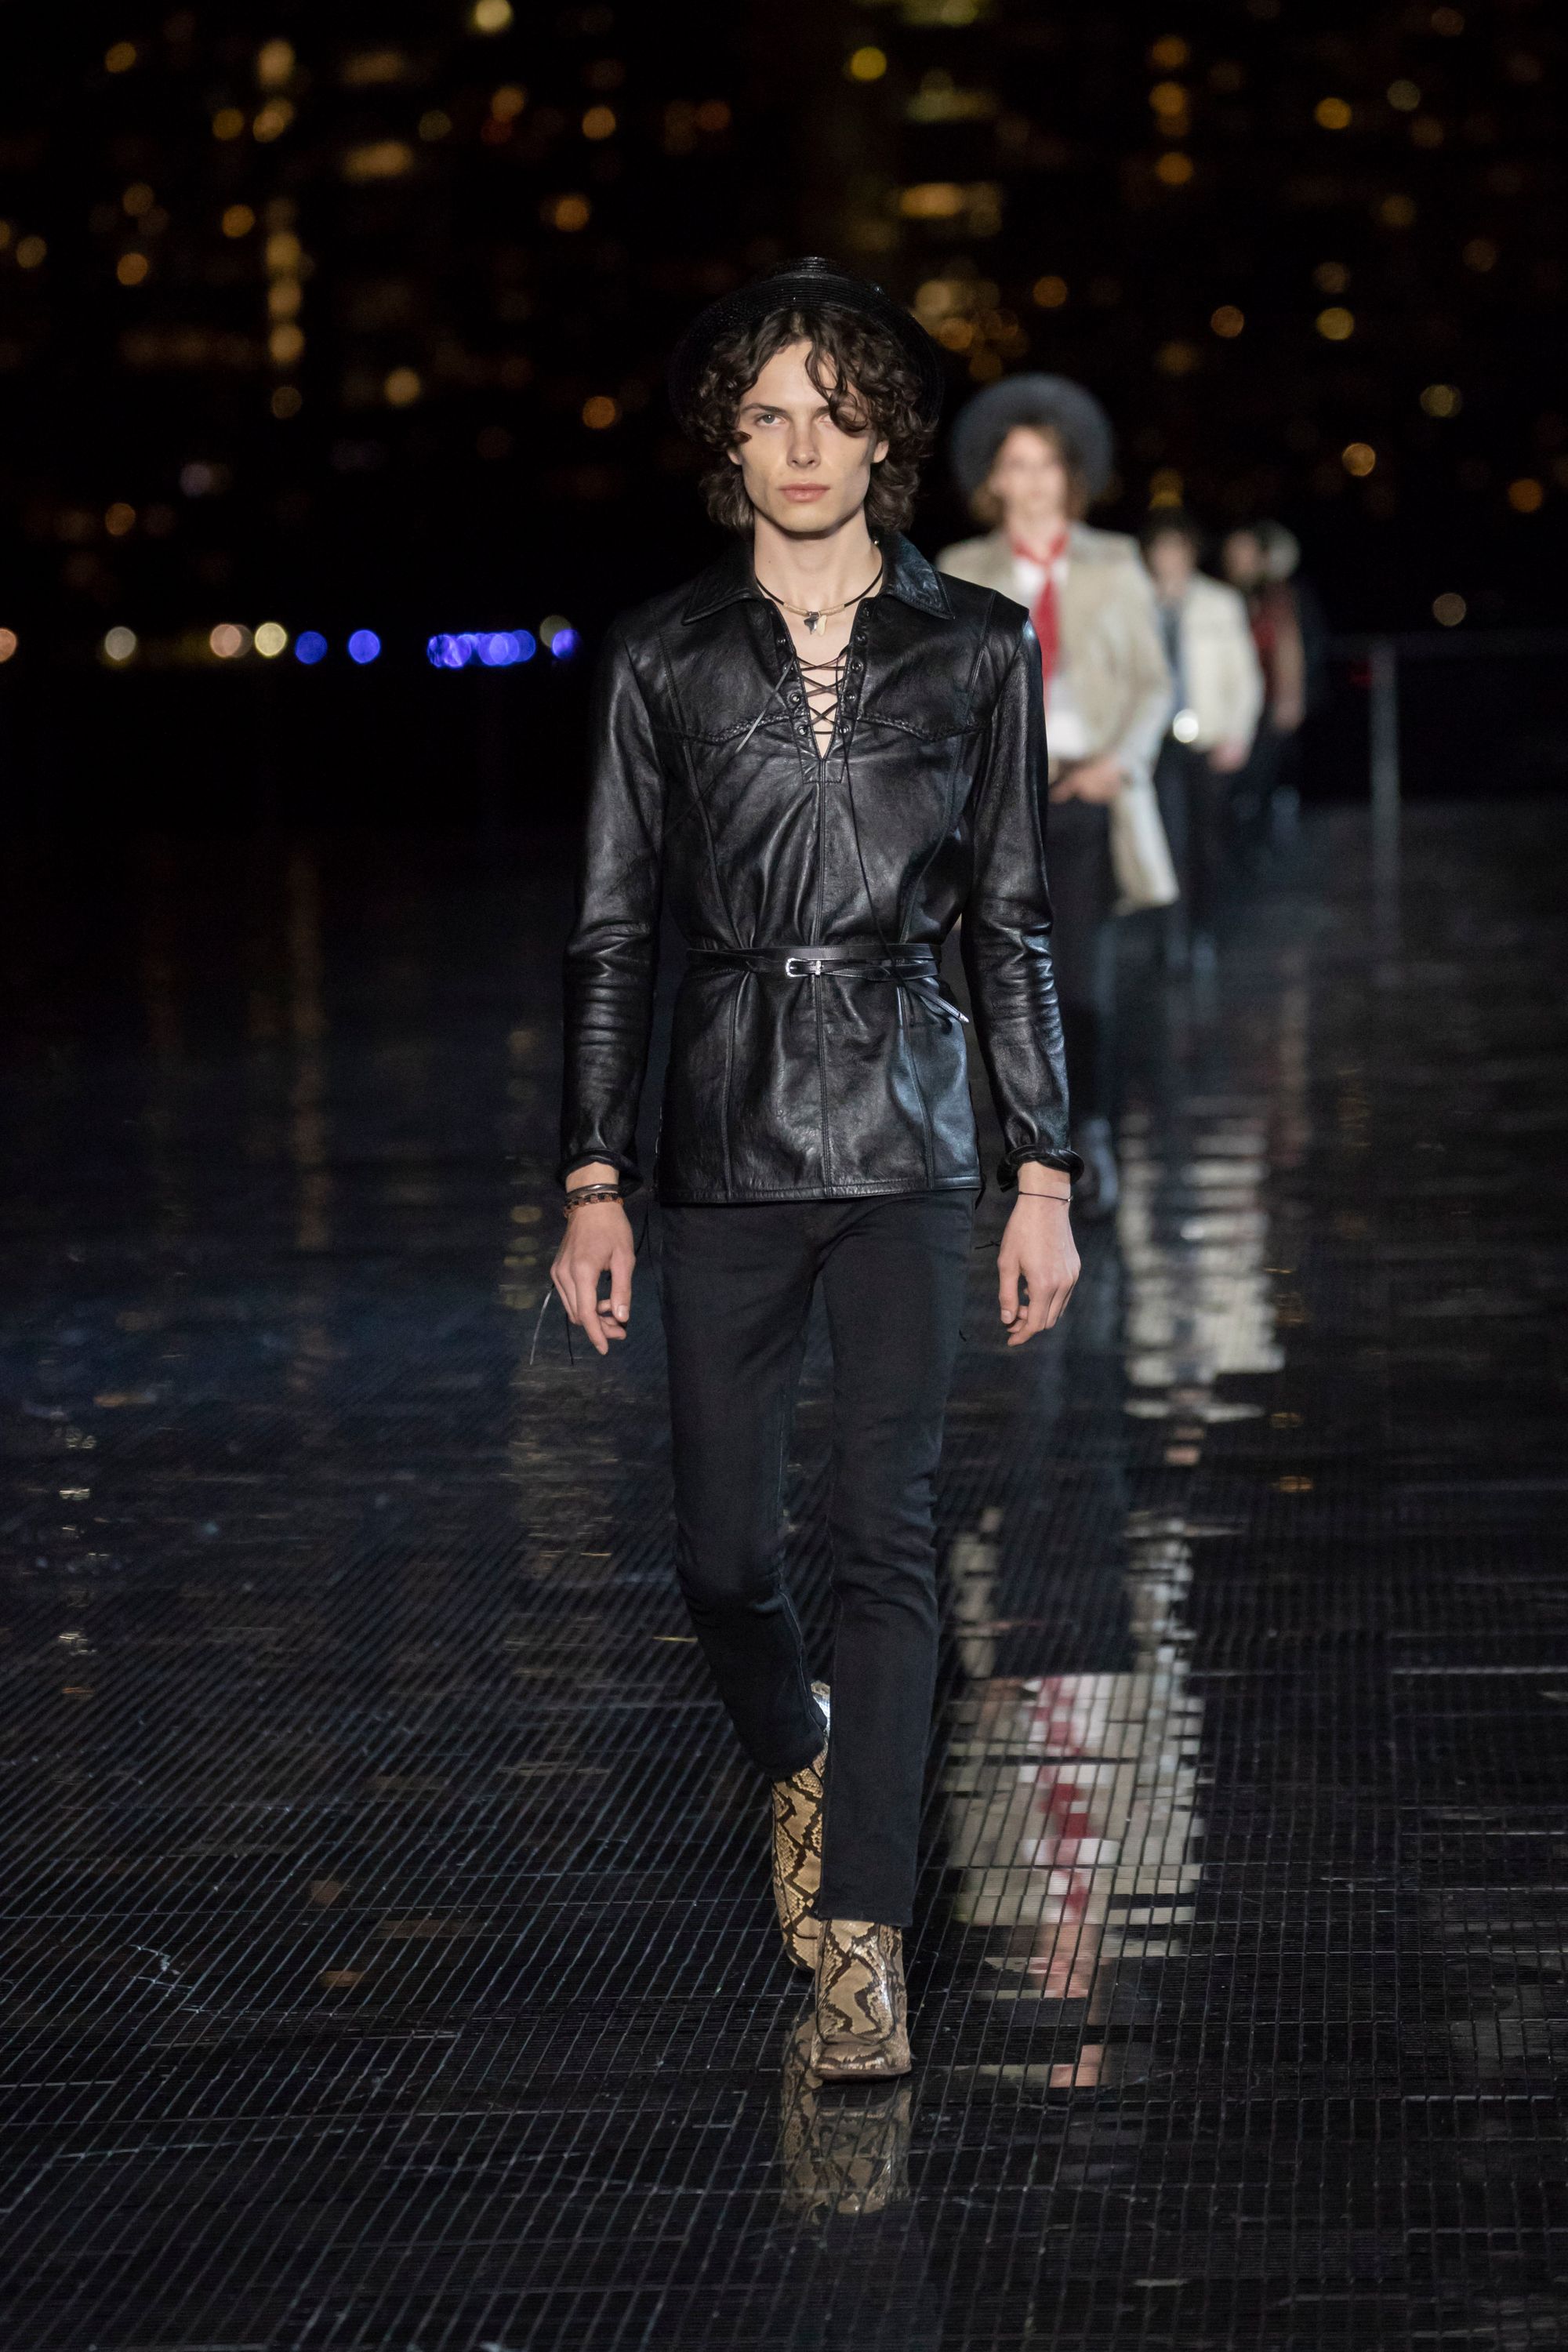 Saint Laurent Presented Spring 2019 Menswear Collection in New York